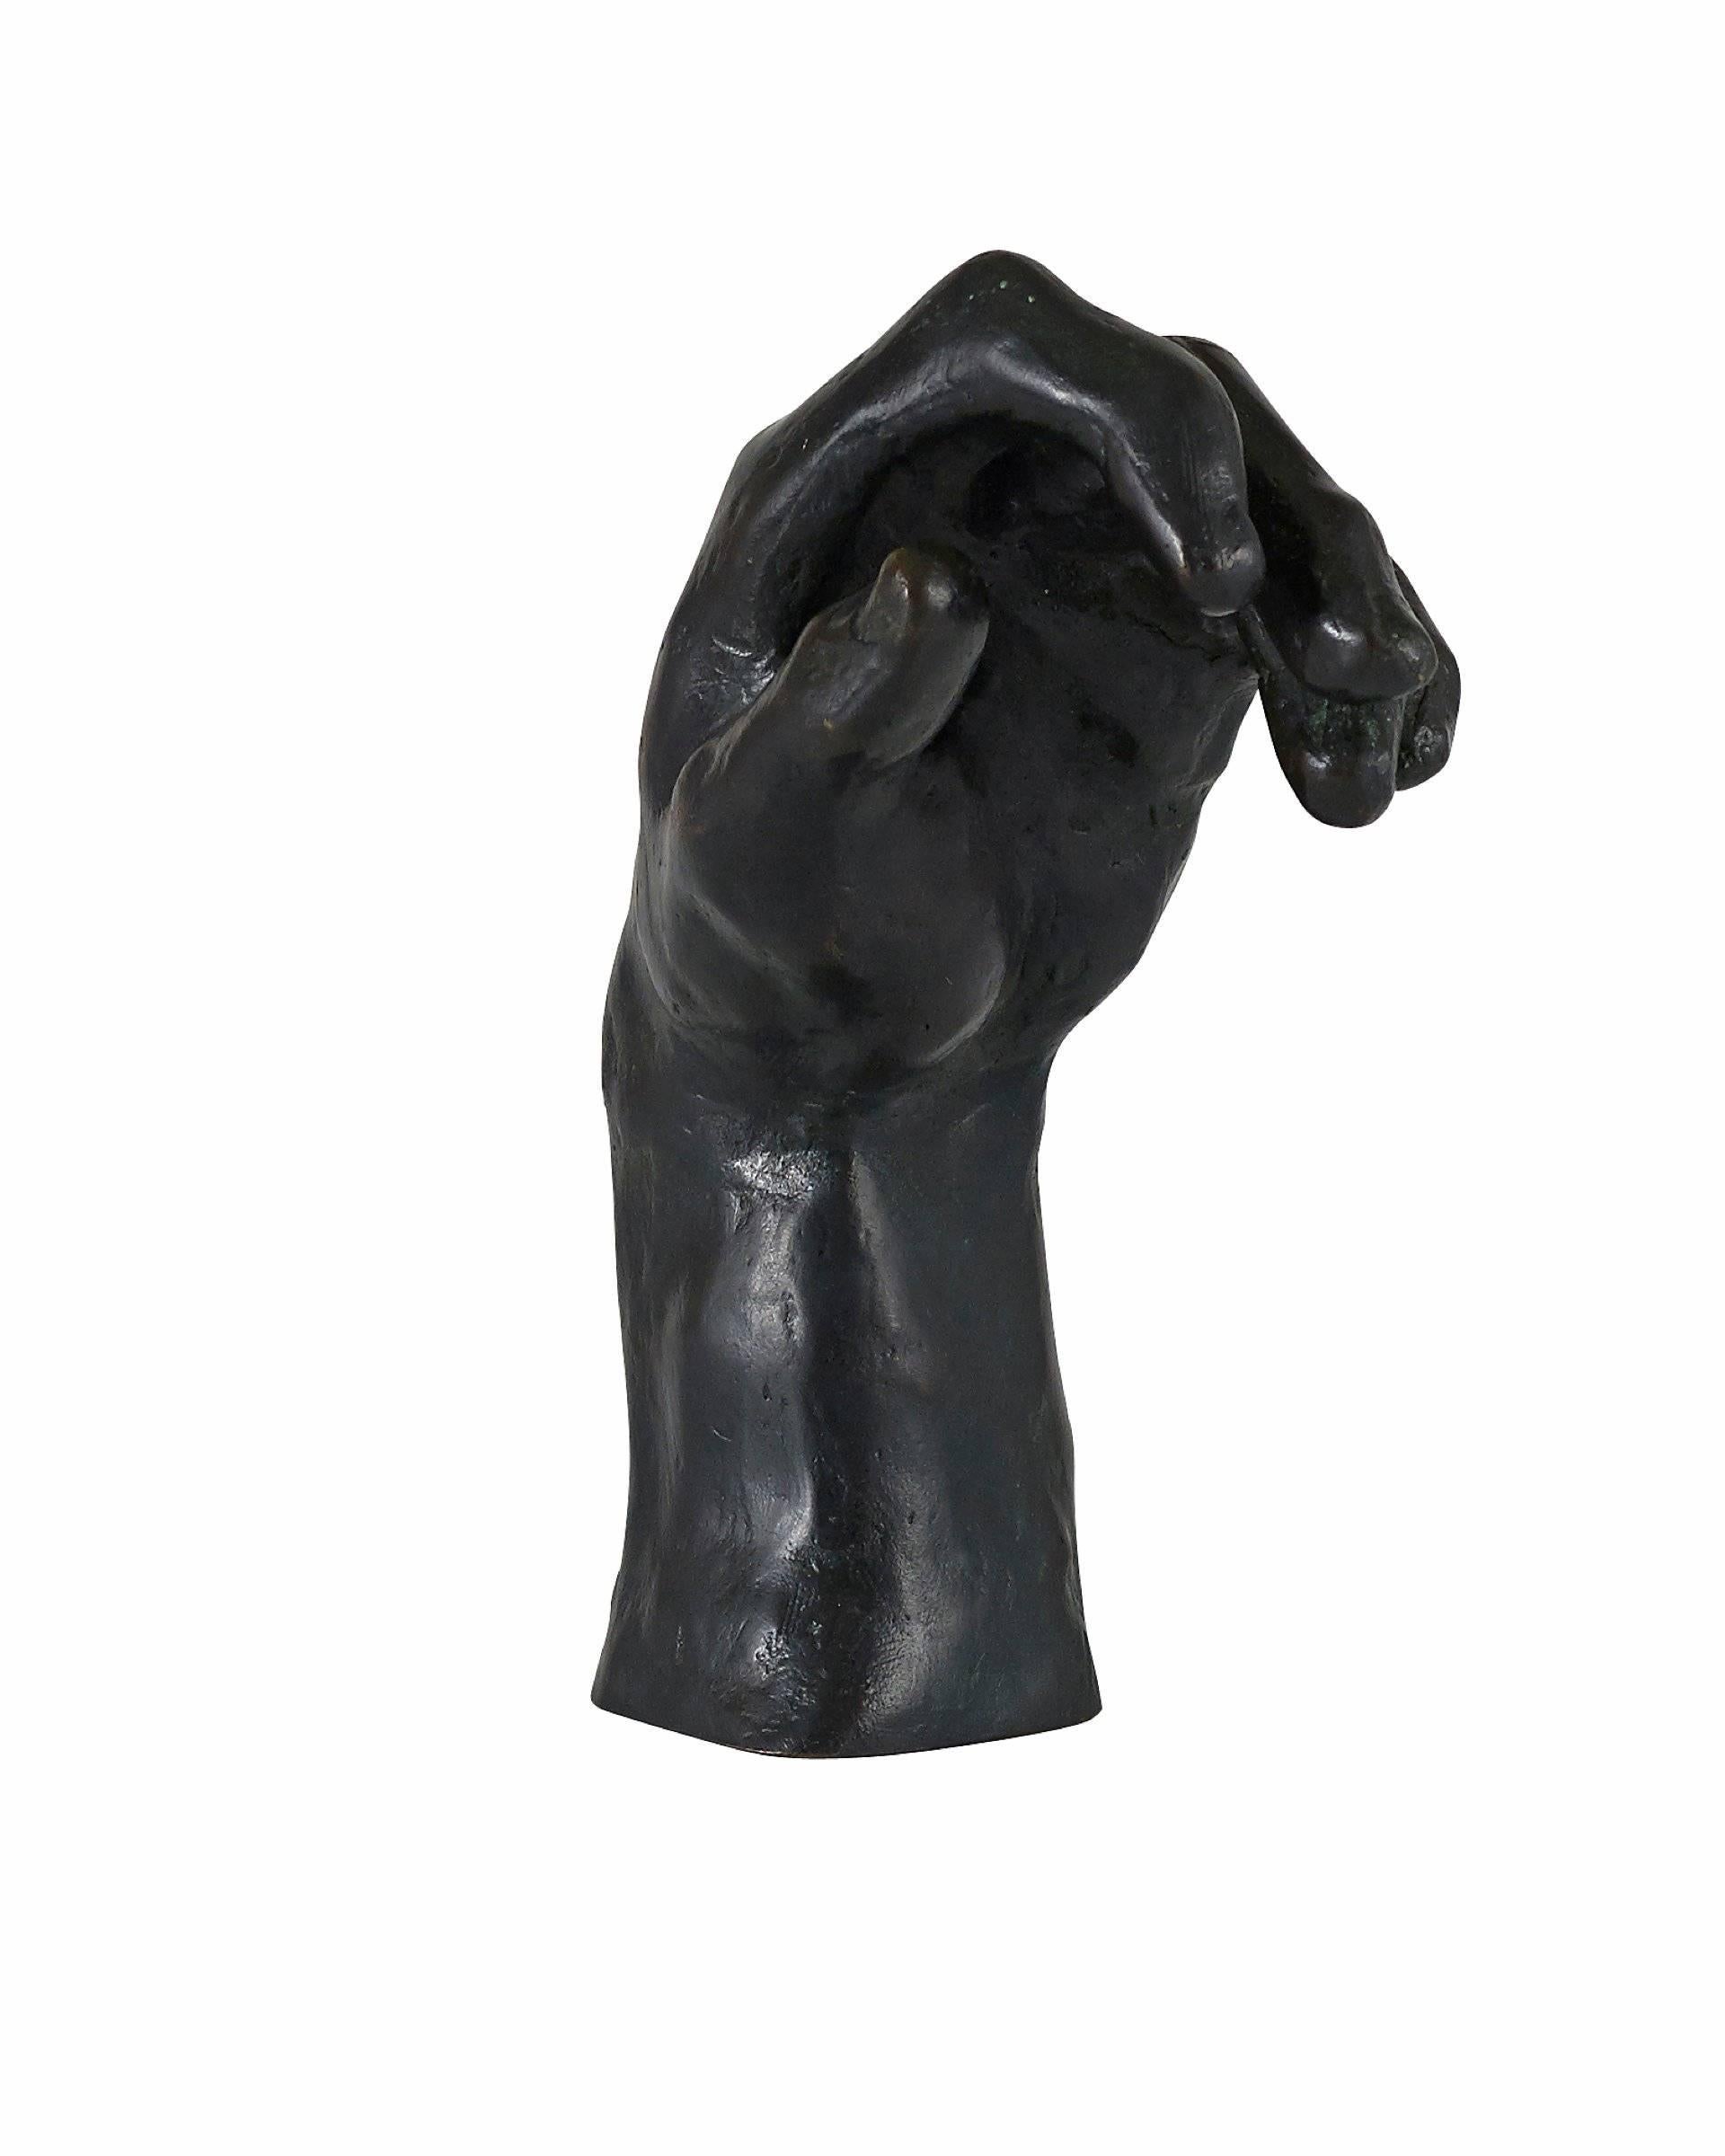 Auguste Rodin Figurative Sculpture - The Hand of the Thinker